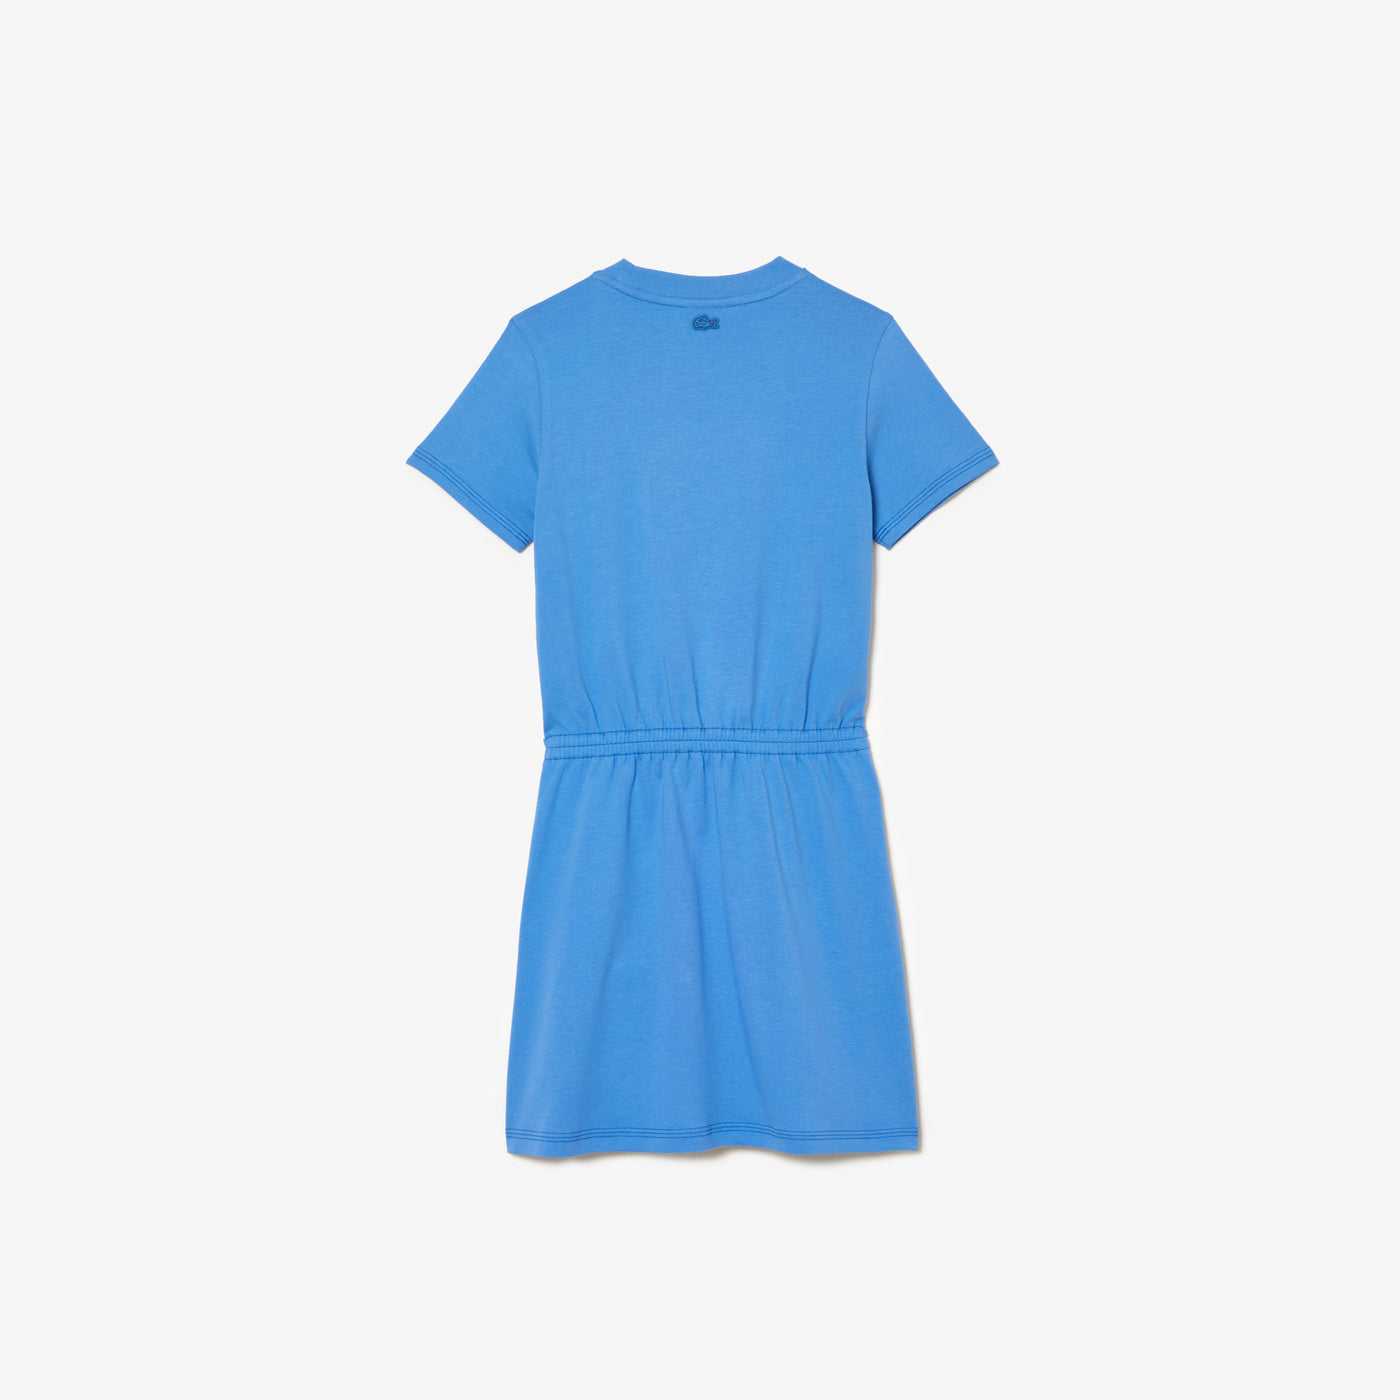 Girls’ Organic Cotton Jersey Fit And Flare Dress - Ej5488